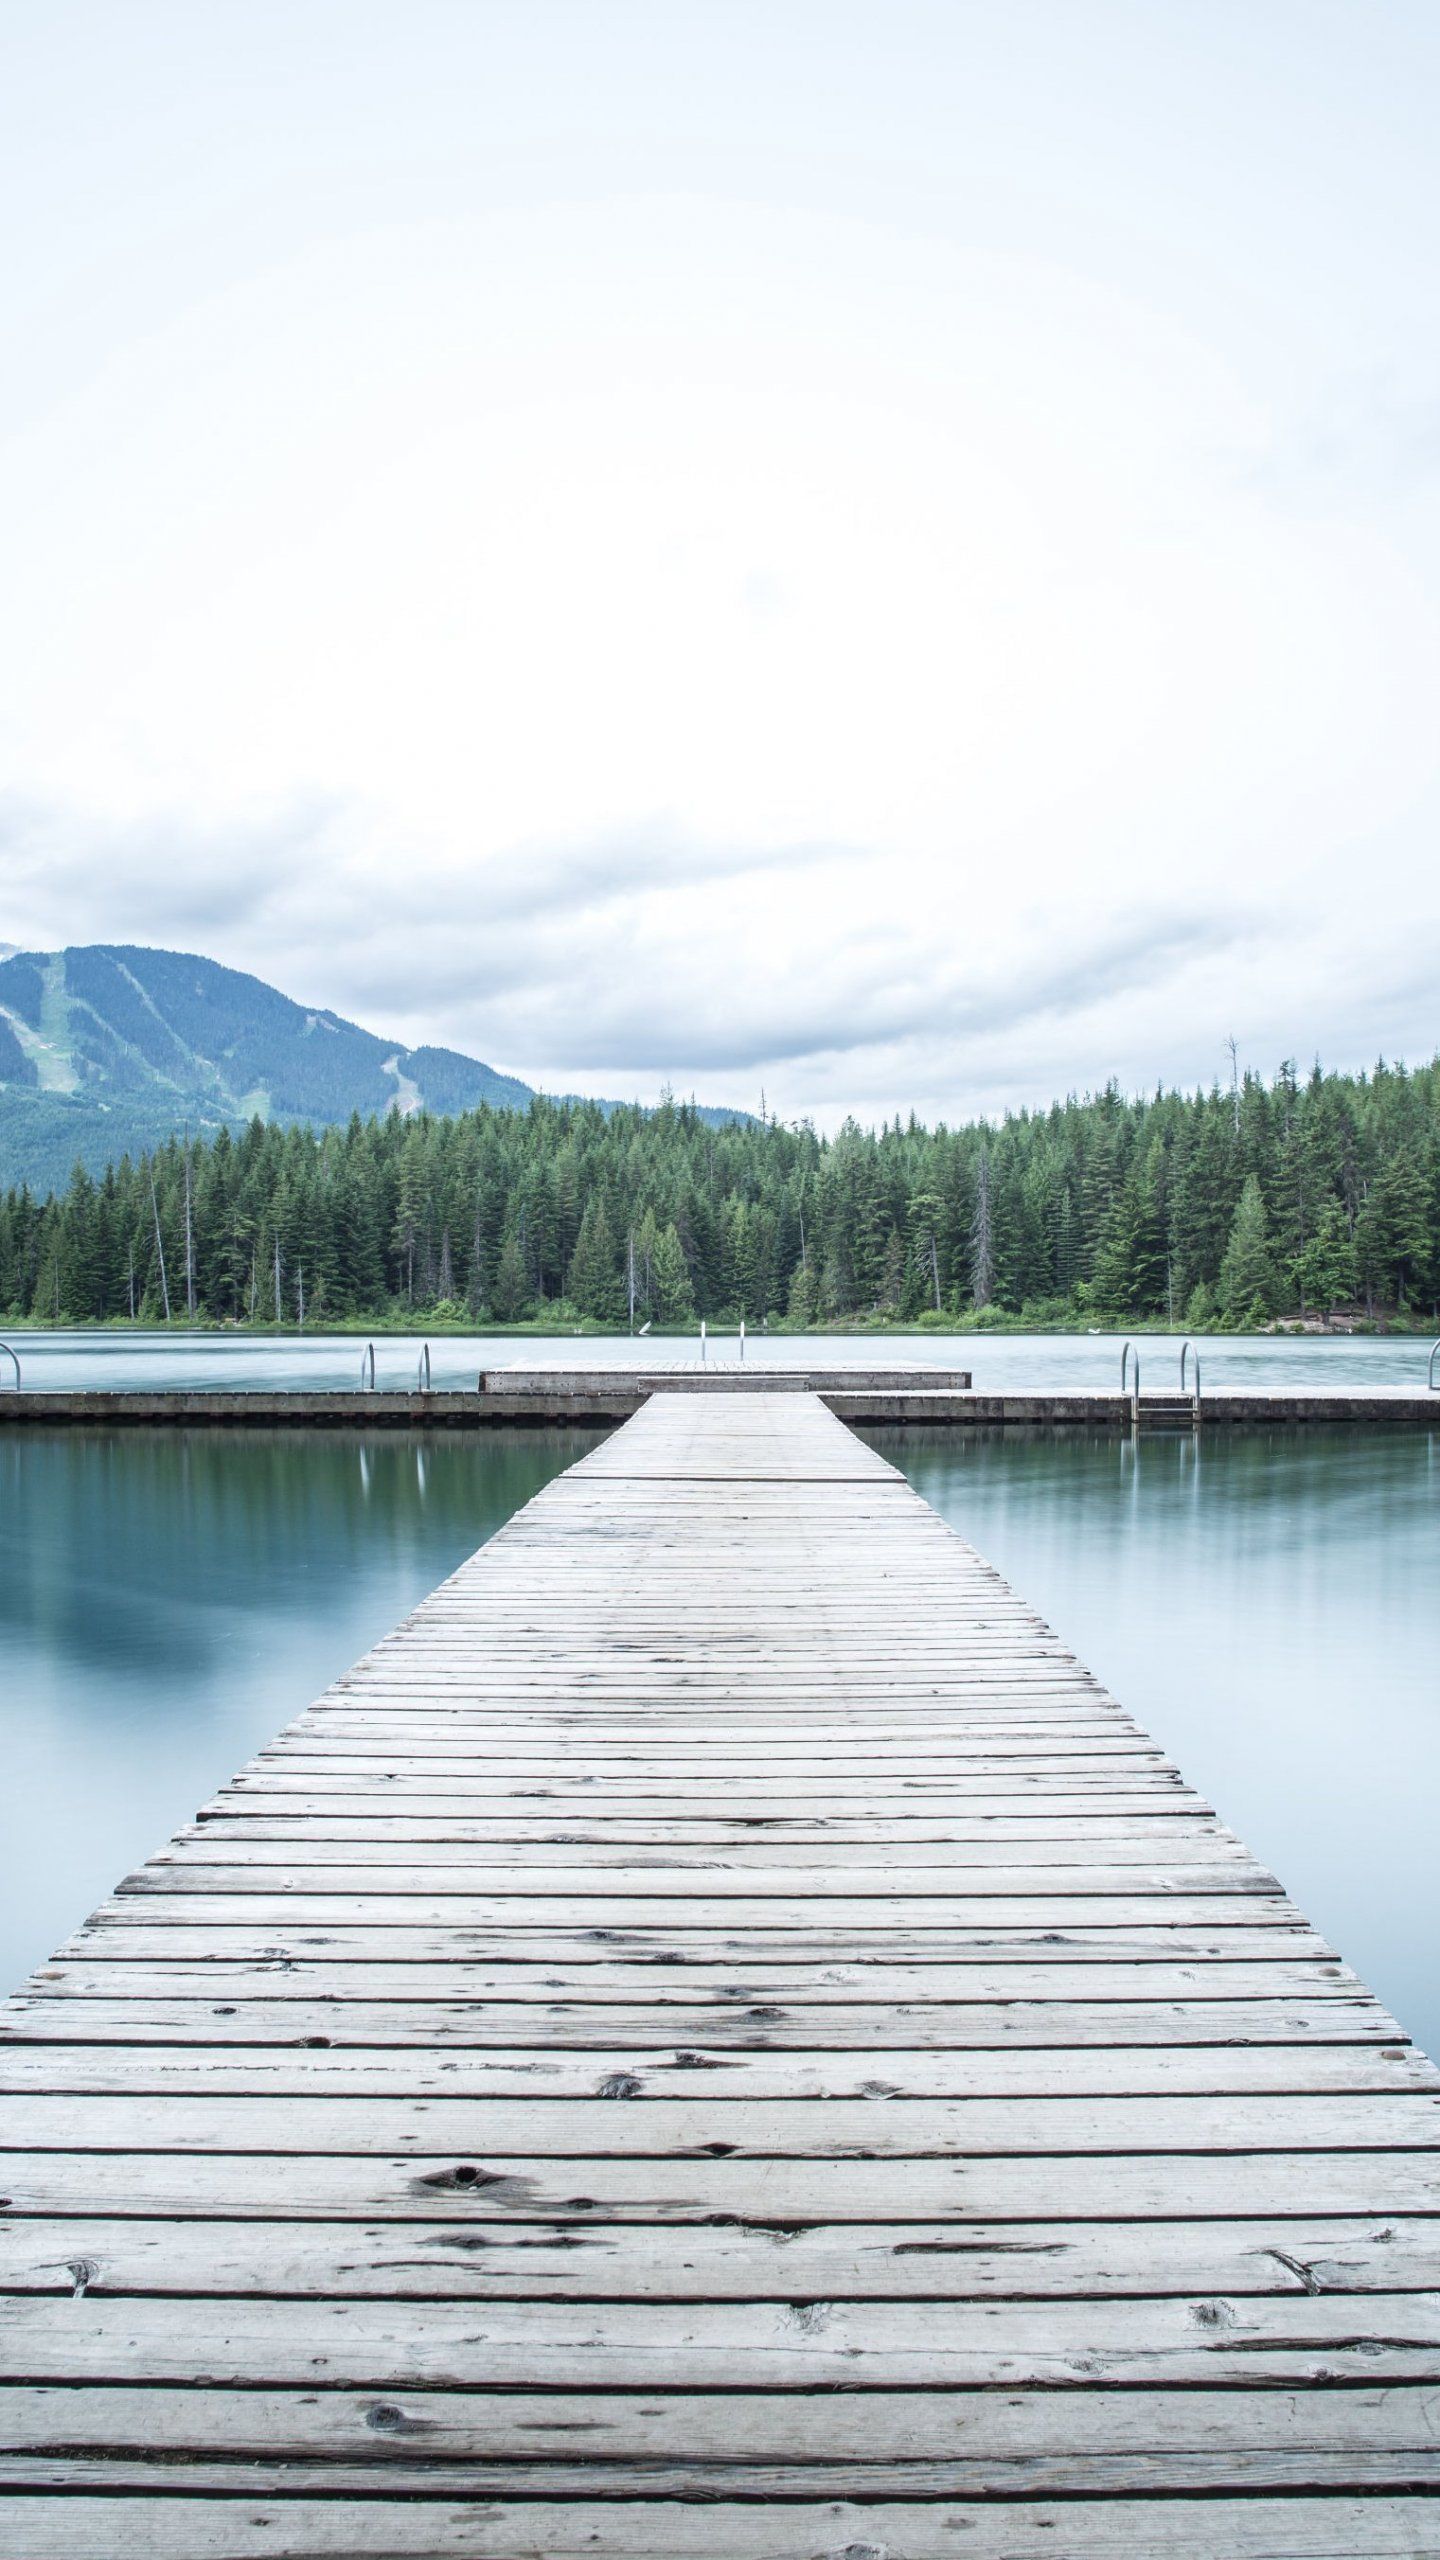 A wooden dock that is next to the water - Lake